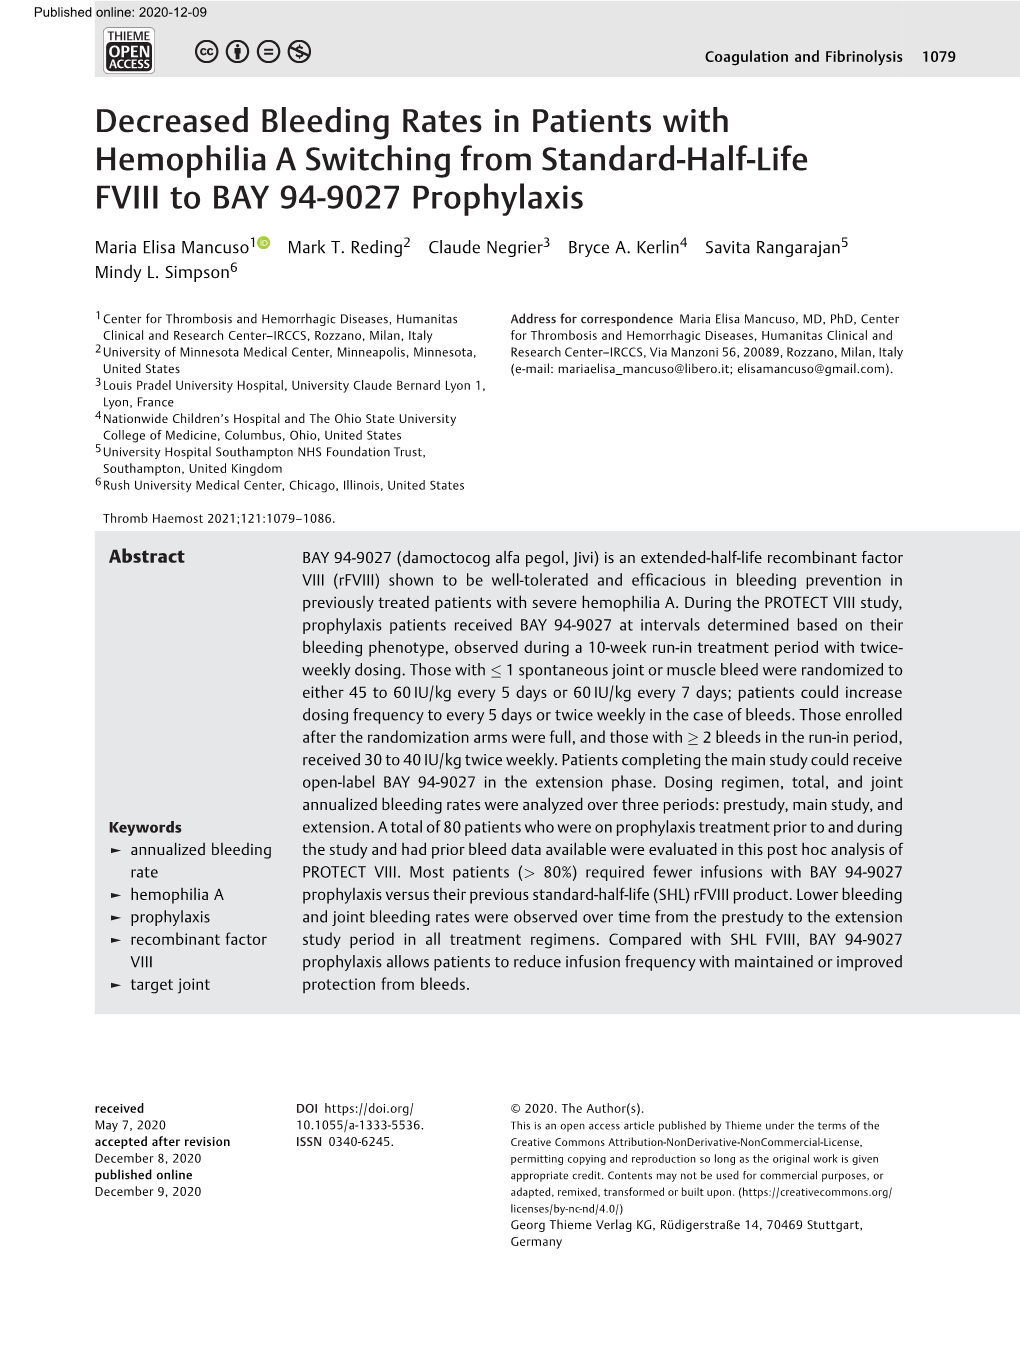 Decreased Bleeding Rates in Patients with Hemophilia a Switching from Standard-Half-Life FVIII to BAY 94-9027 Prophylaxis